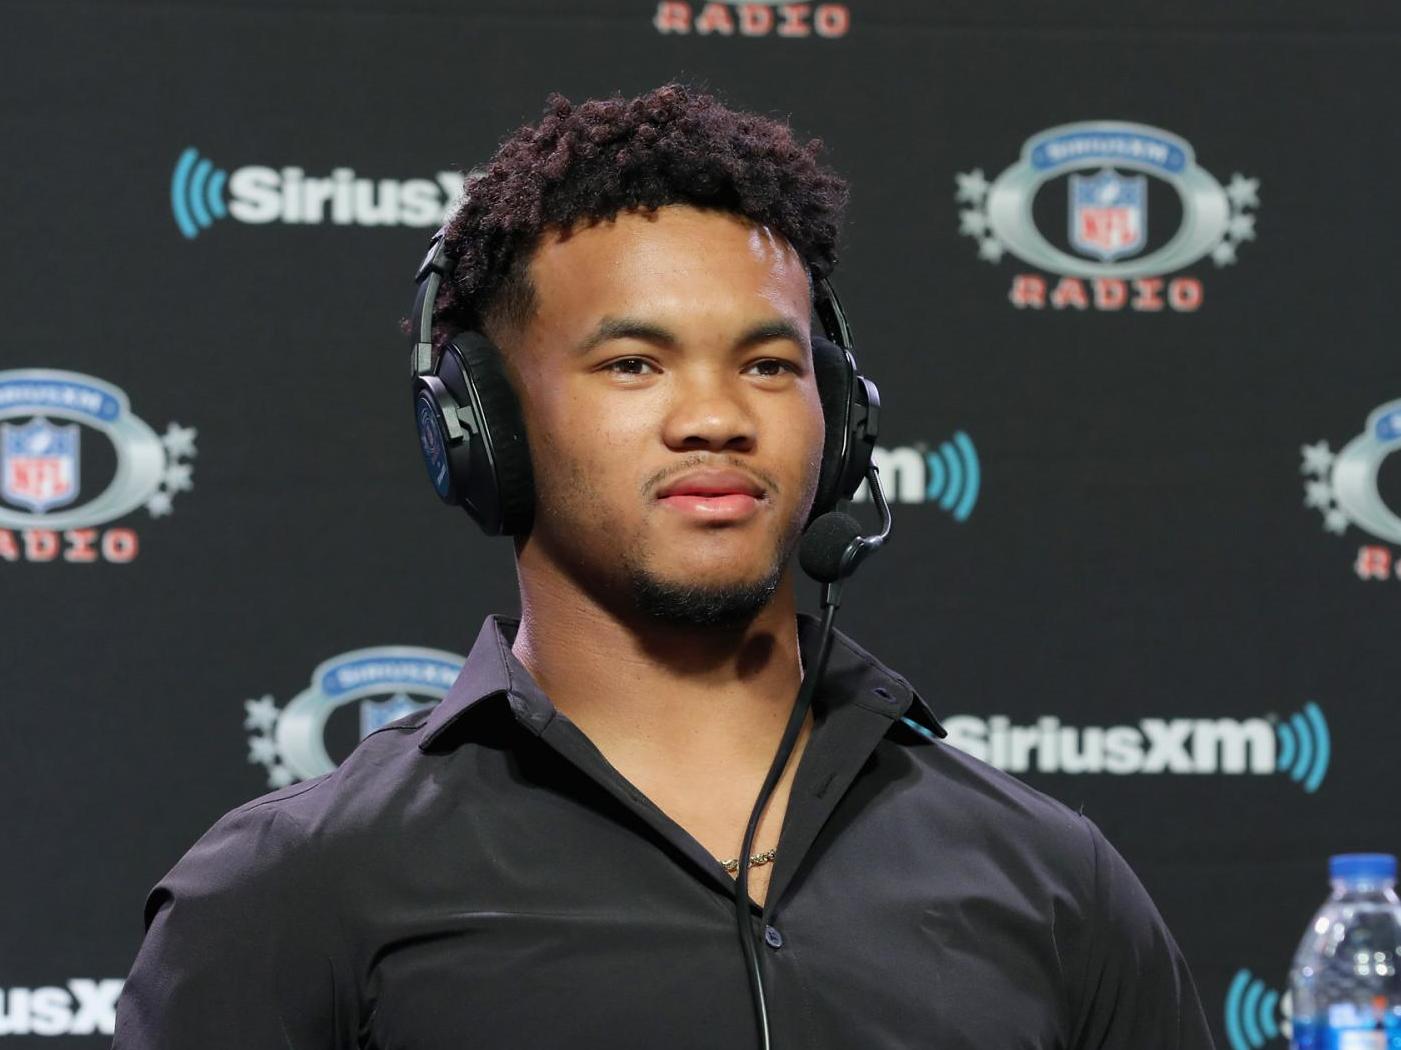 Kyler Murray is projected to go No 1 overall